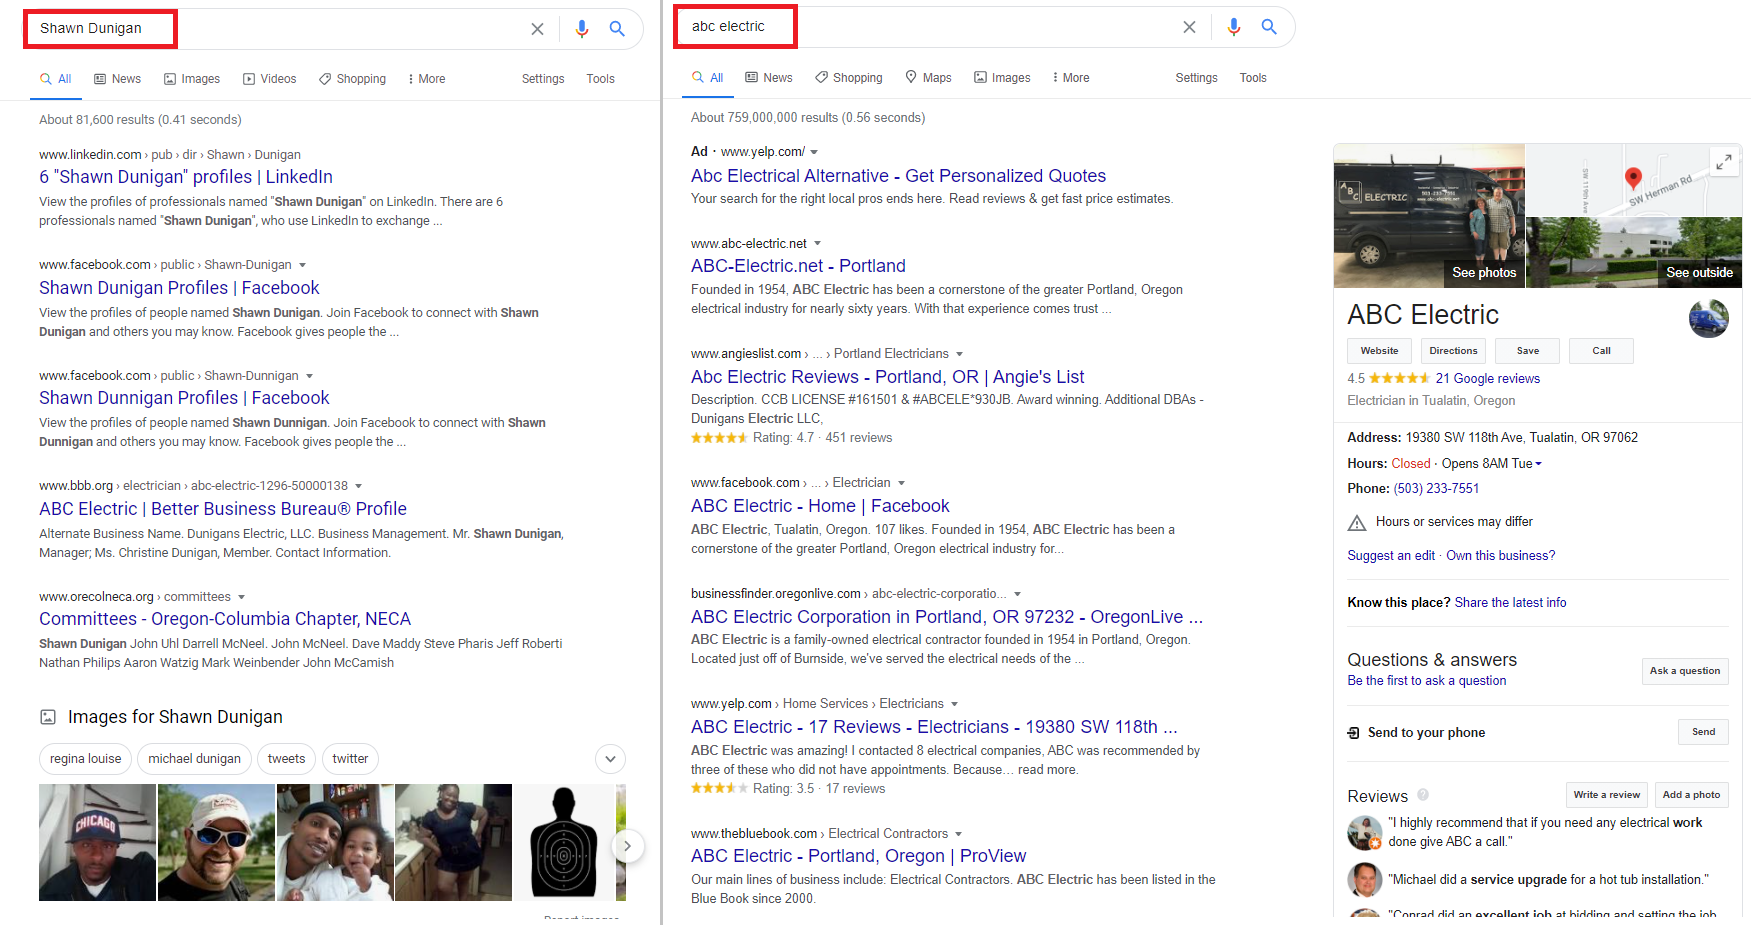 comparison of business and personal google search results